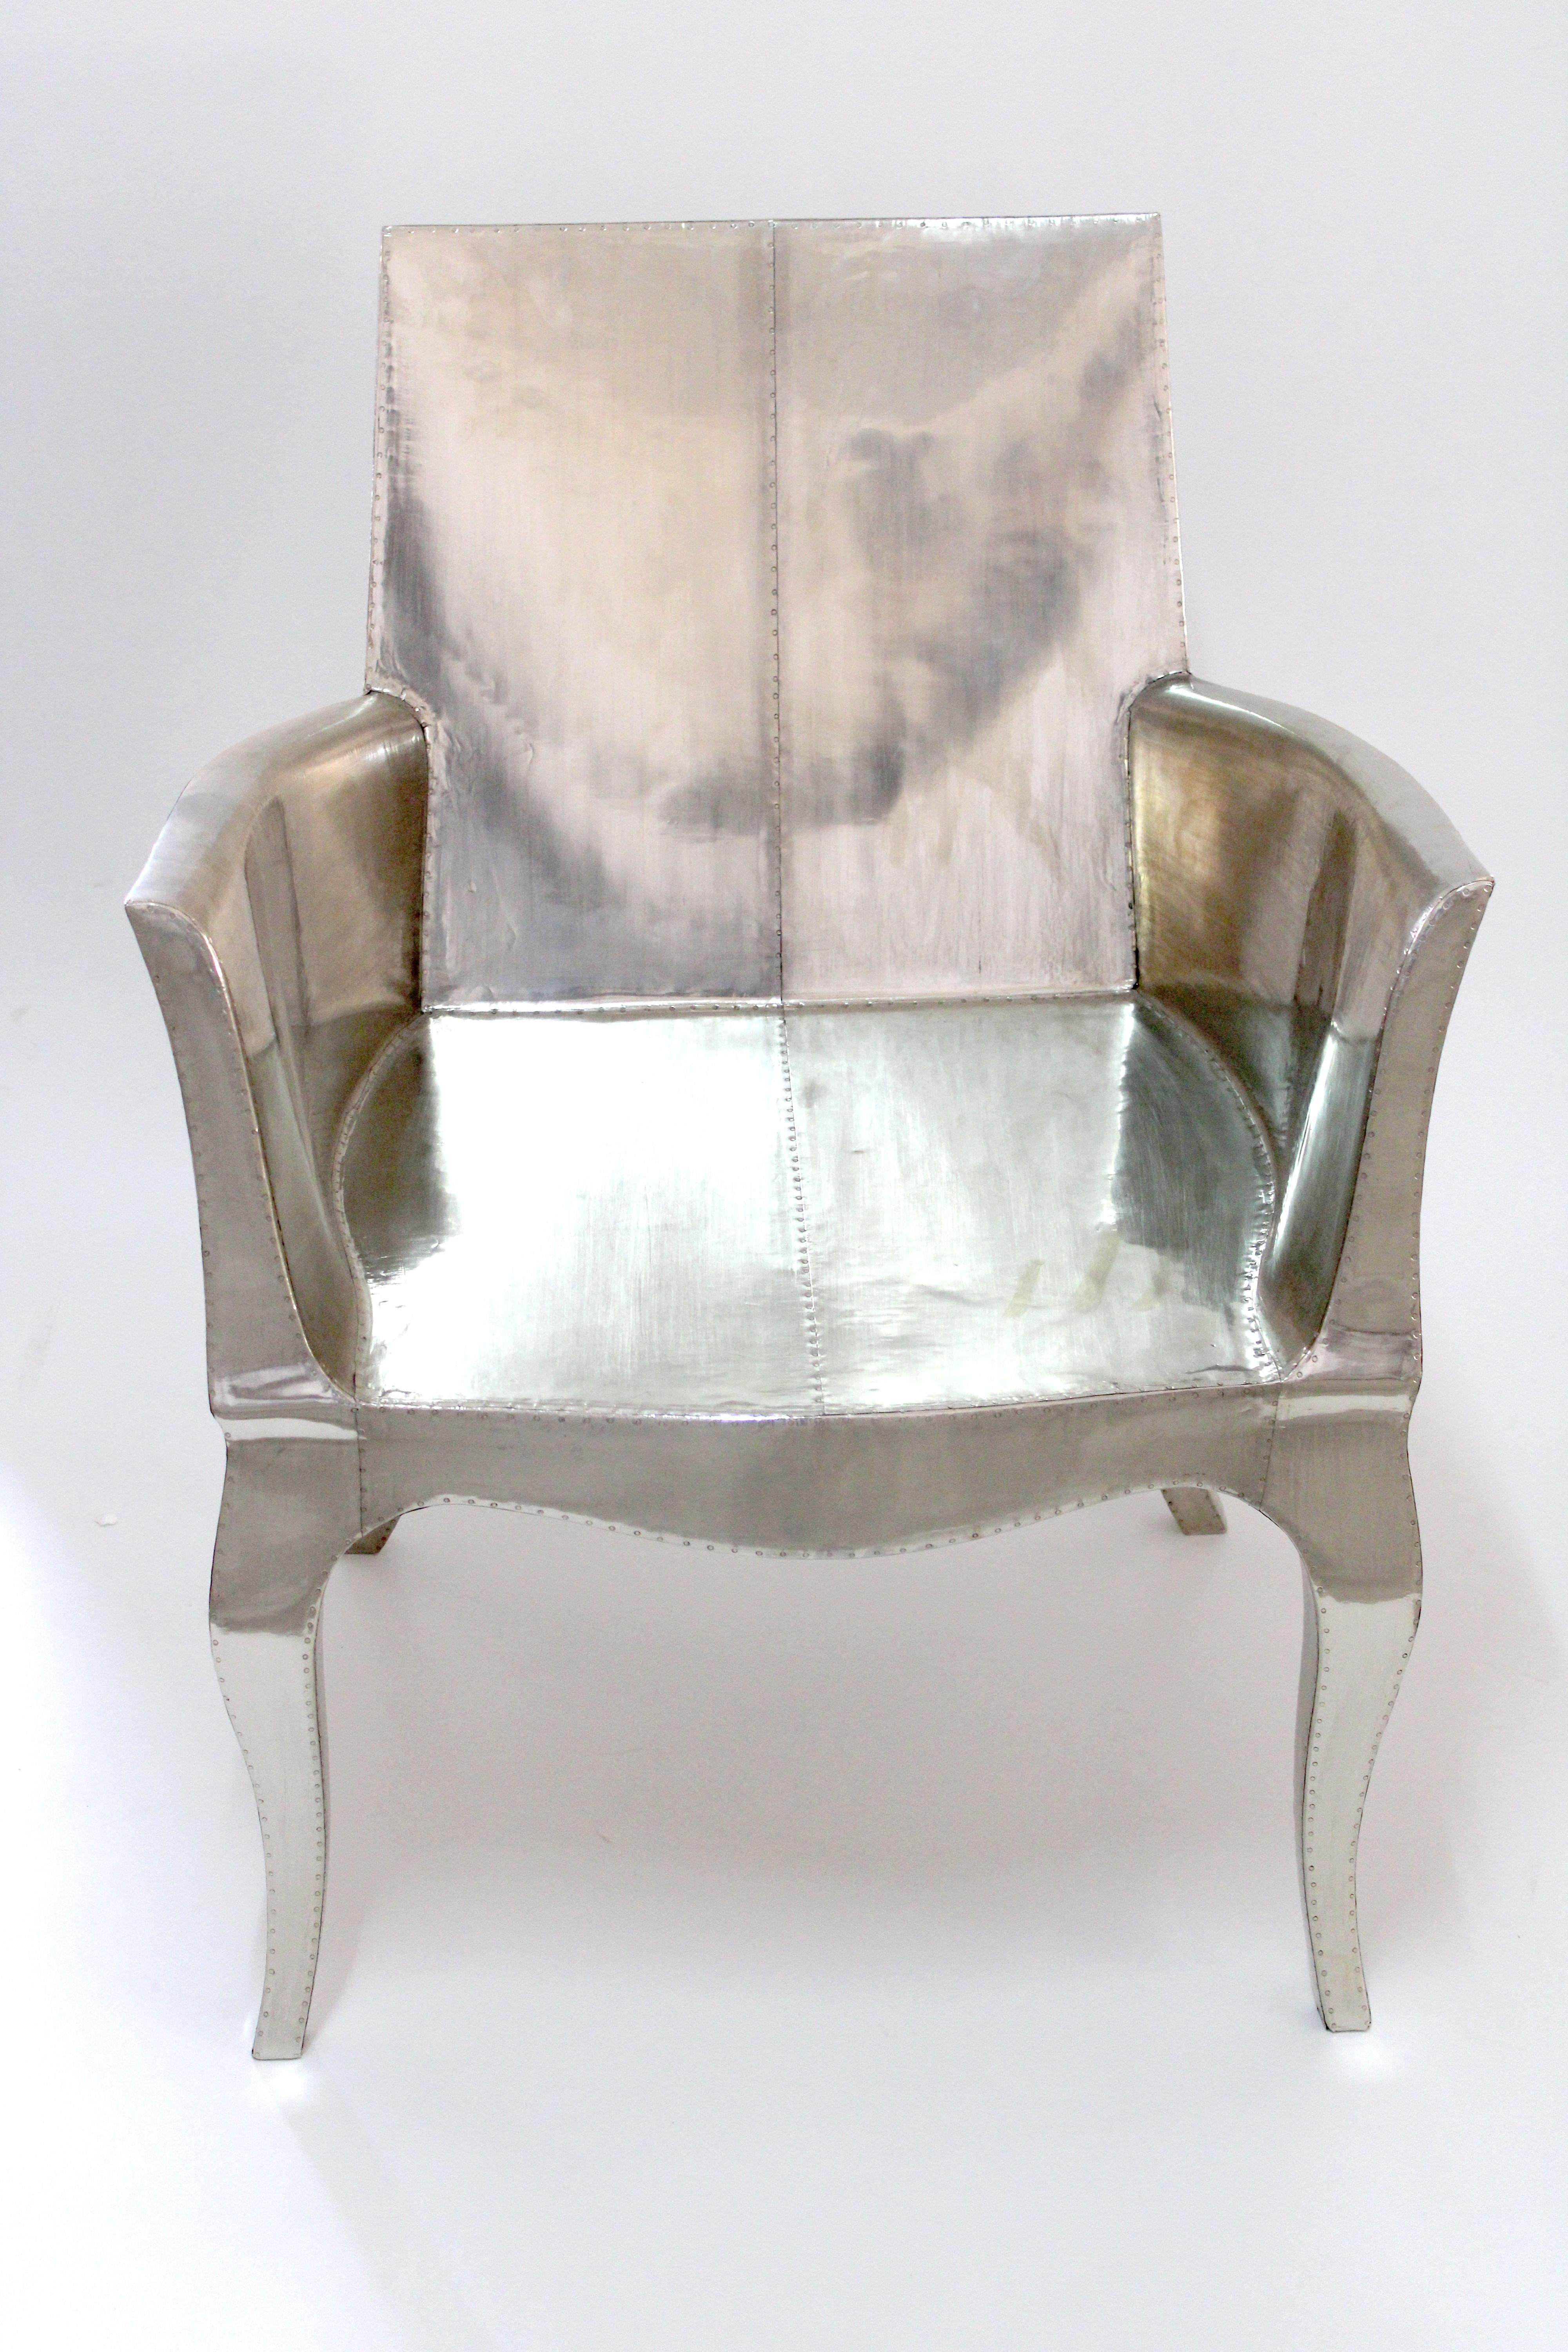 Sheet Metal Art Deco Chair Styles Chairs in Smooth White by Paul Mathieu for S. Odegard For Sale